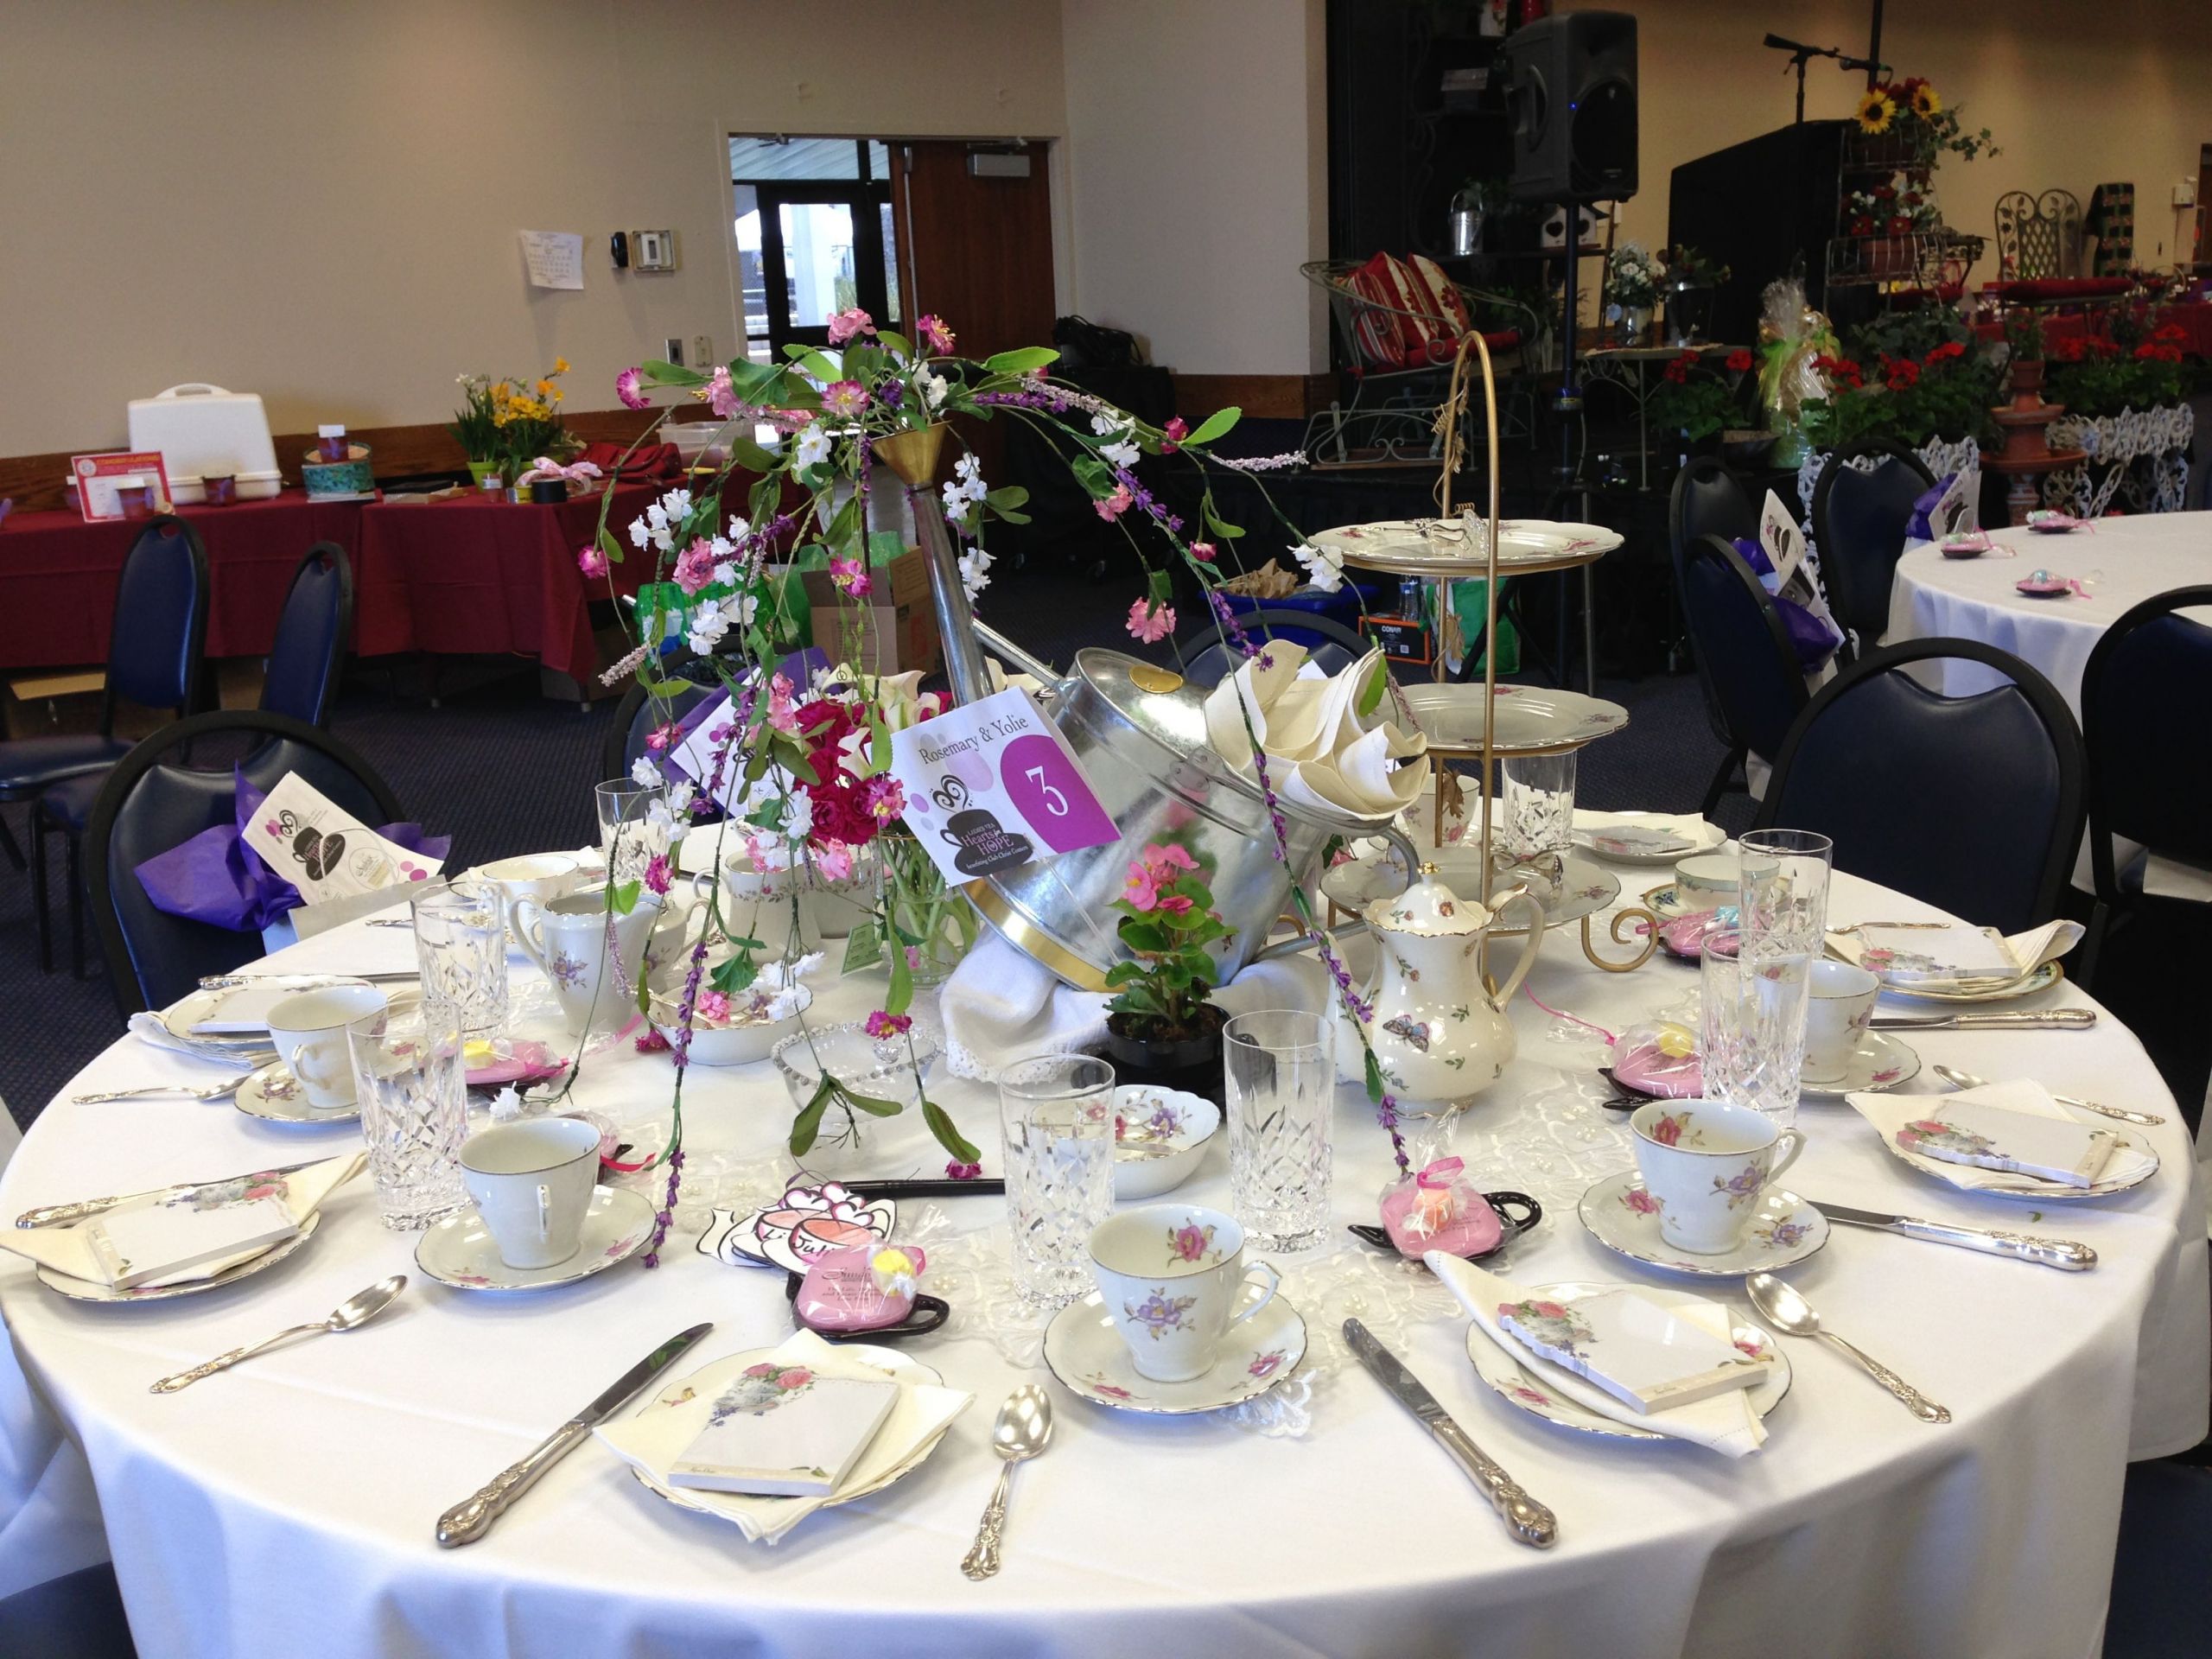 Tea Party Ideas For Ladies
 Decorated for a la s Tea Party for charity "Club Christ